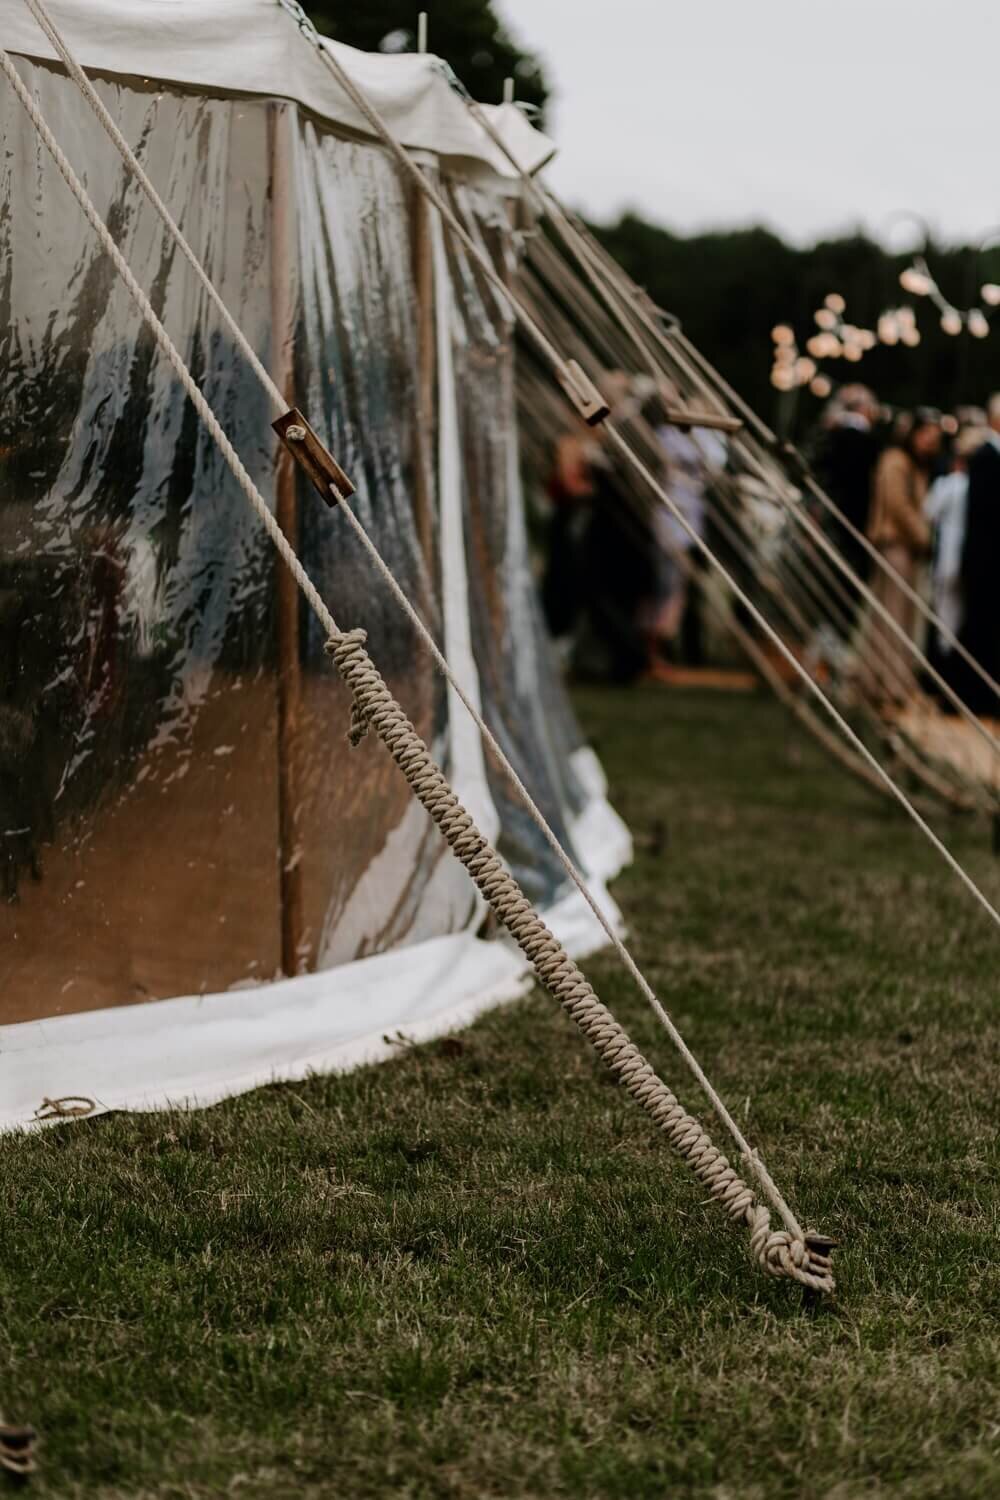 The outside of a pole marquee showing rope pining the maruqee to the ground